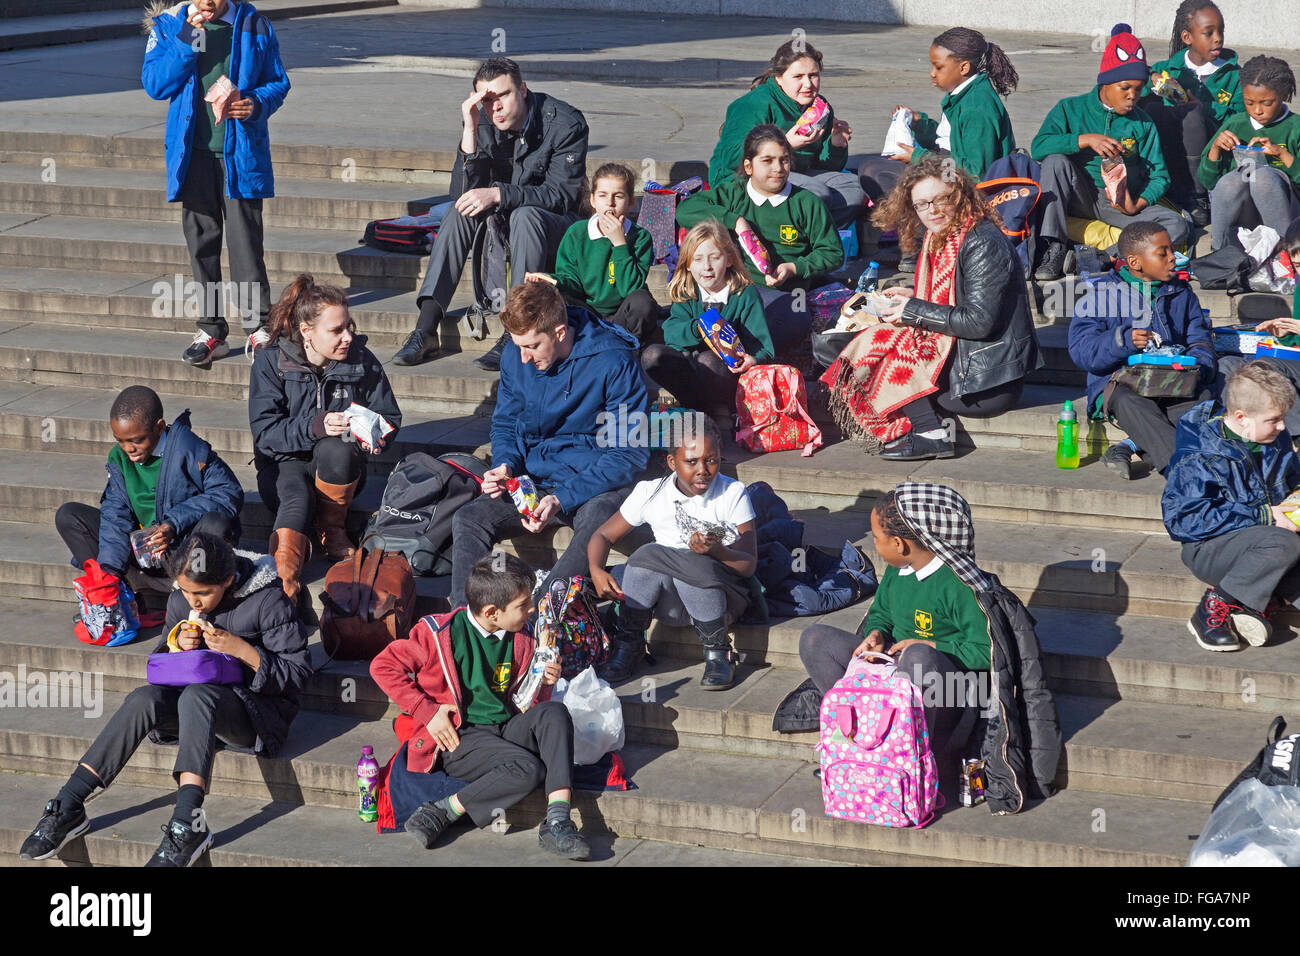 London, Trafalgar Square   A primary school party lunching on the steps of the square Stock Photo